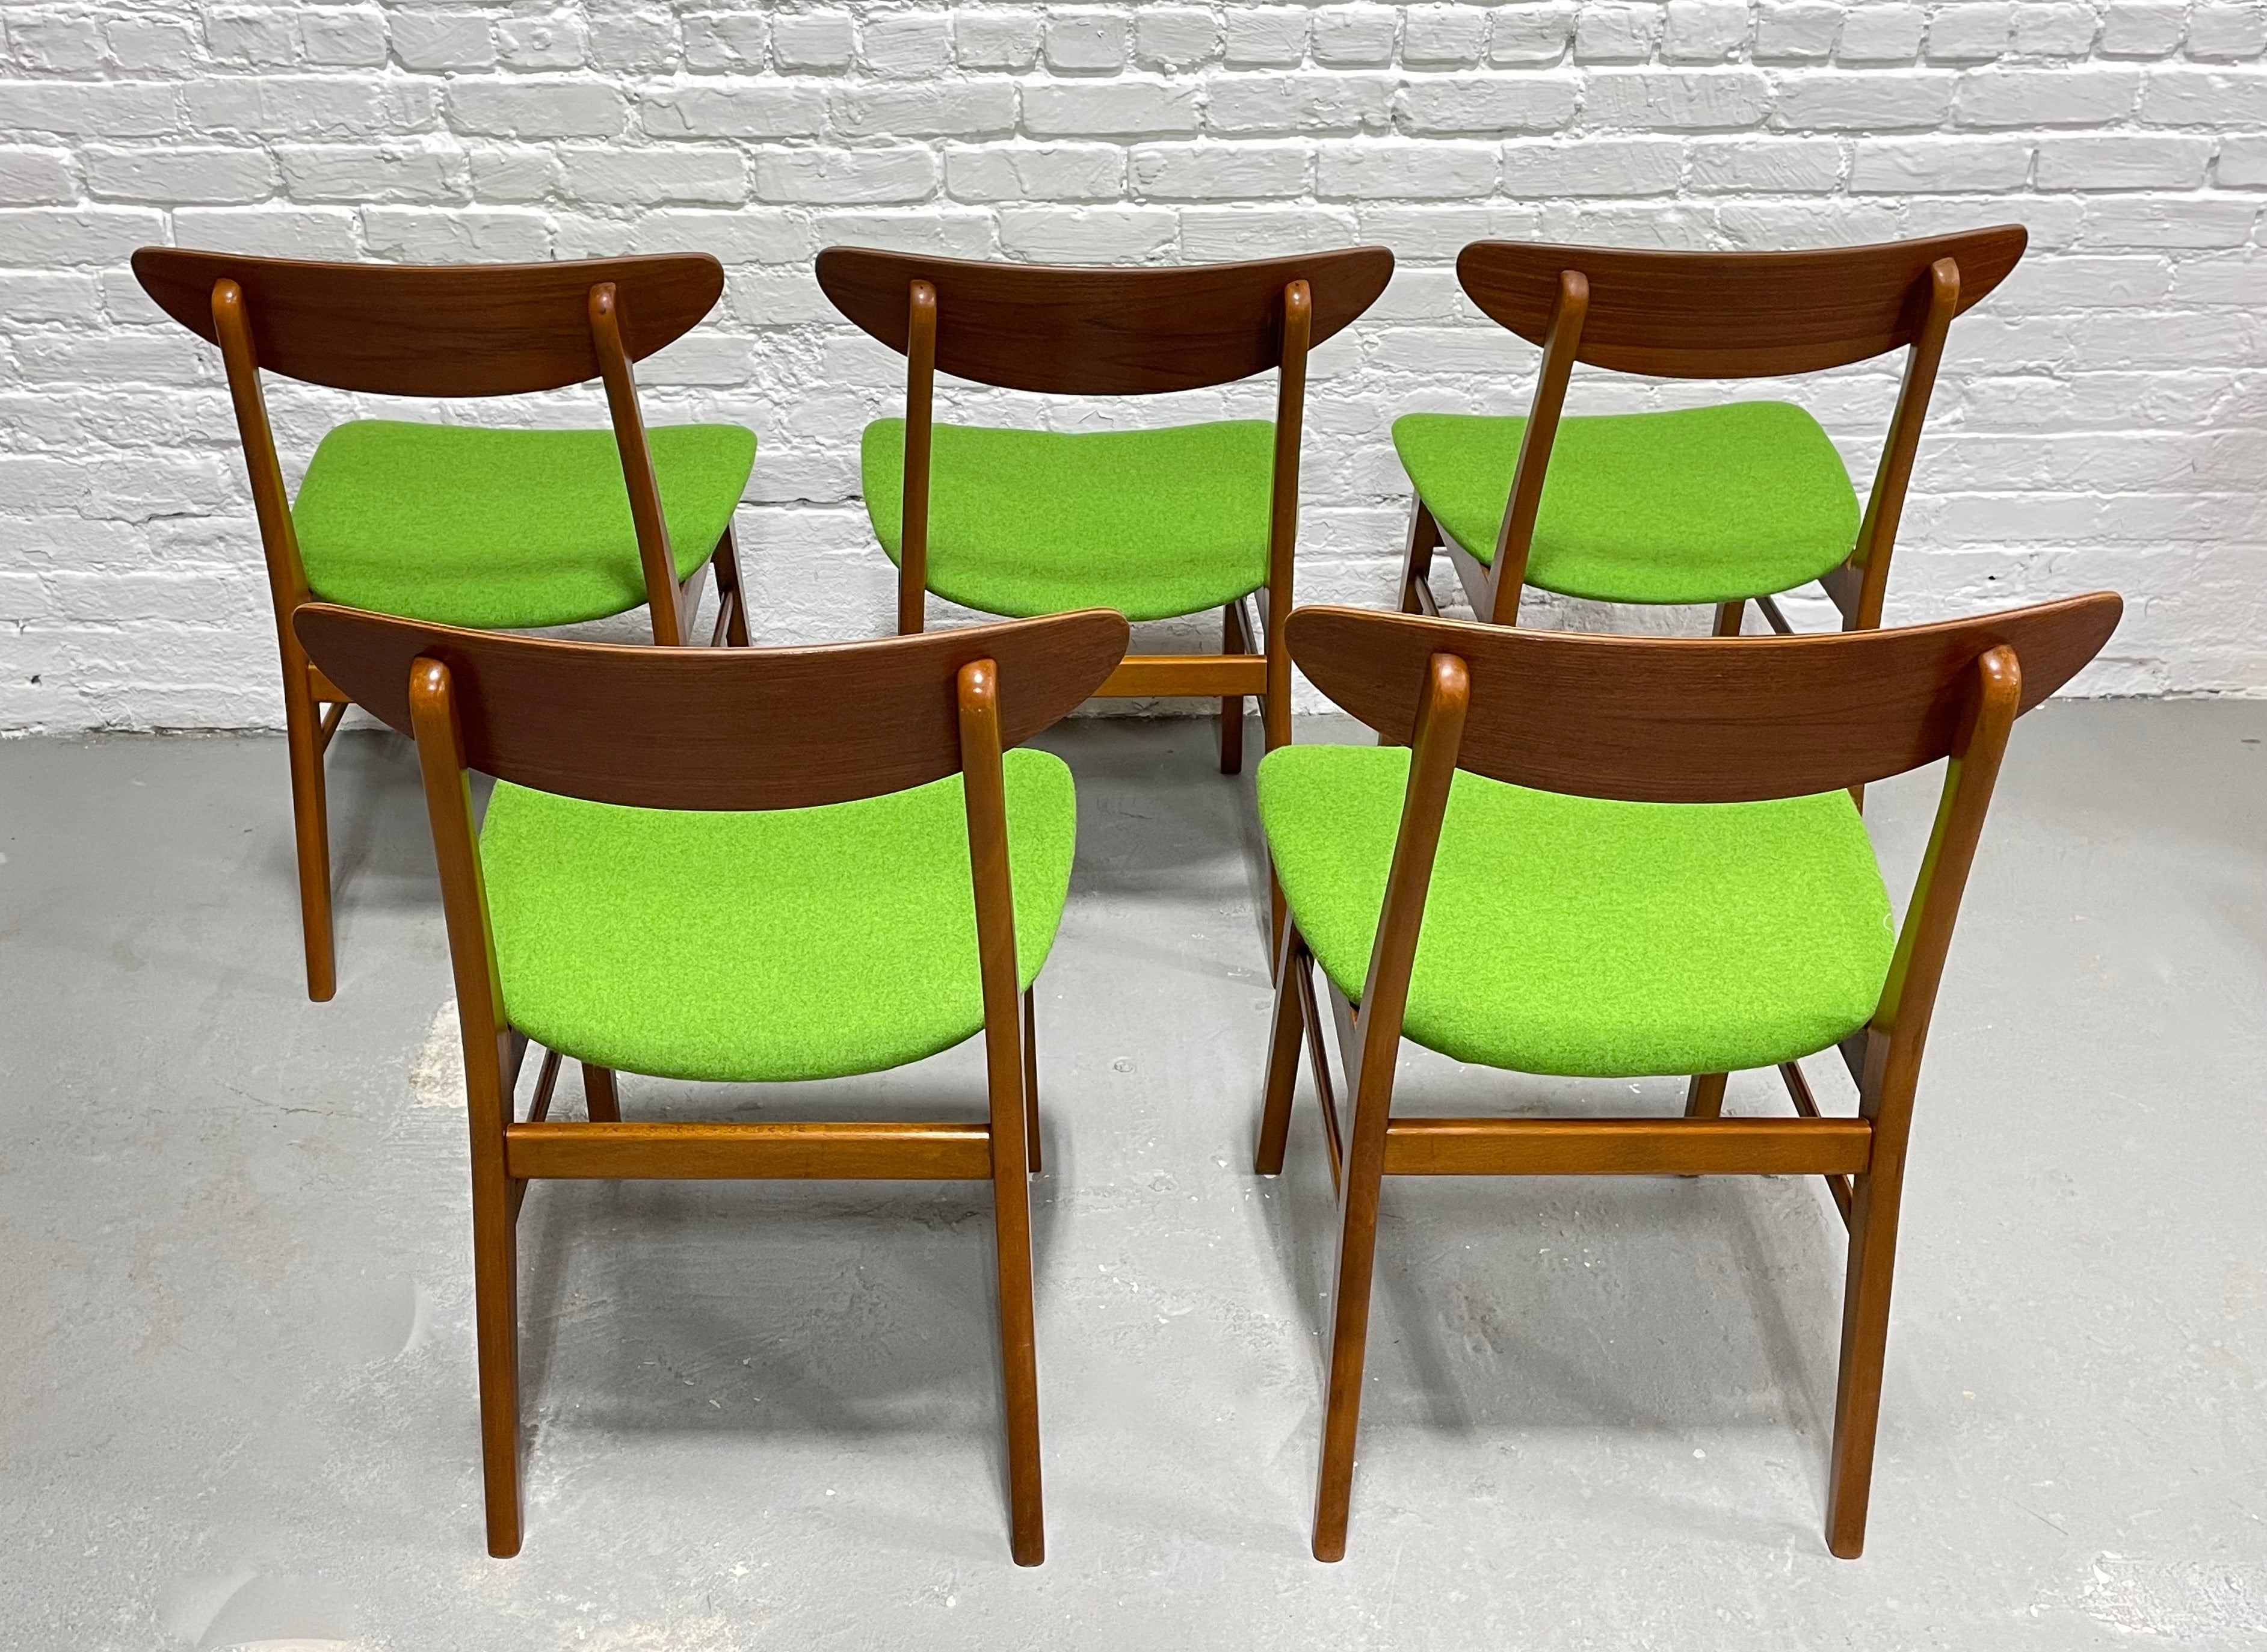 Mid Century MODERN Teak Danish DINING CHAIRS by Farstrup Mobler, Set of Five, c. 1960's